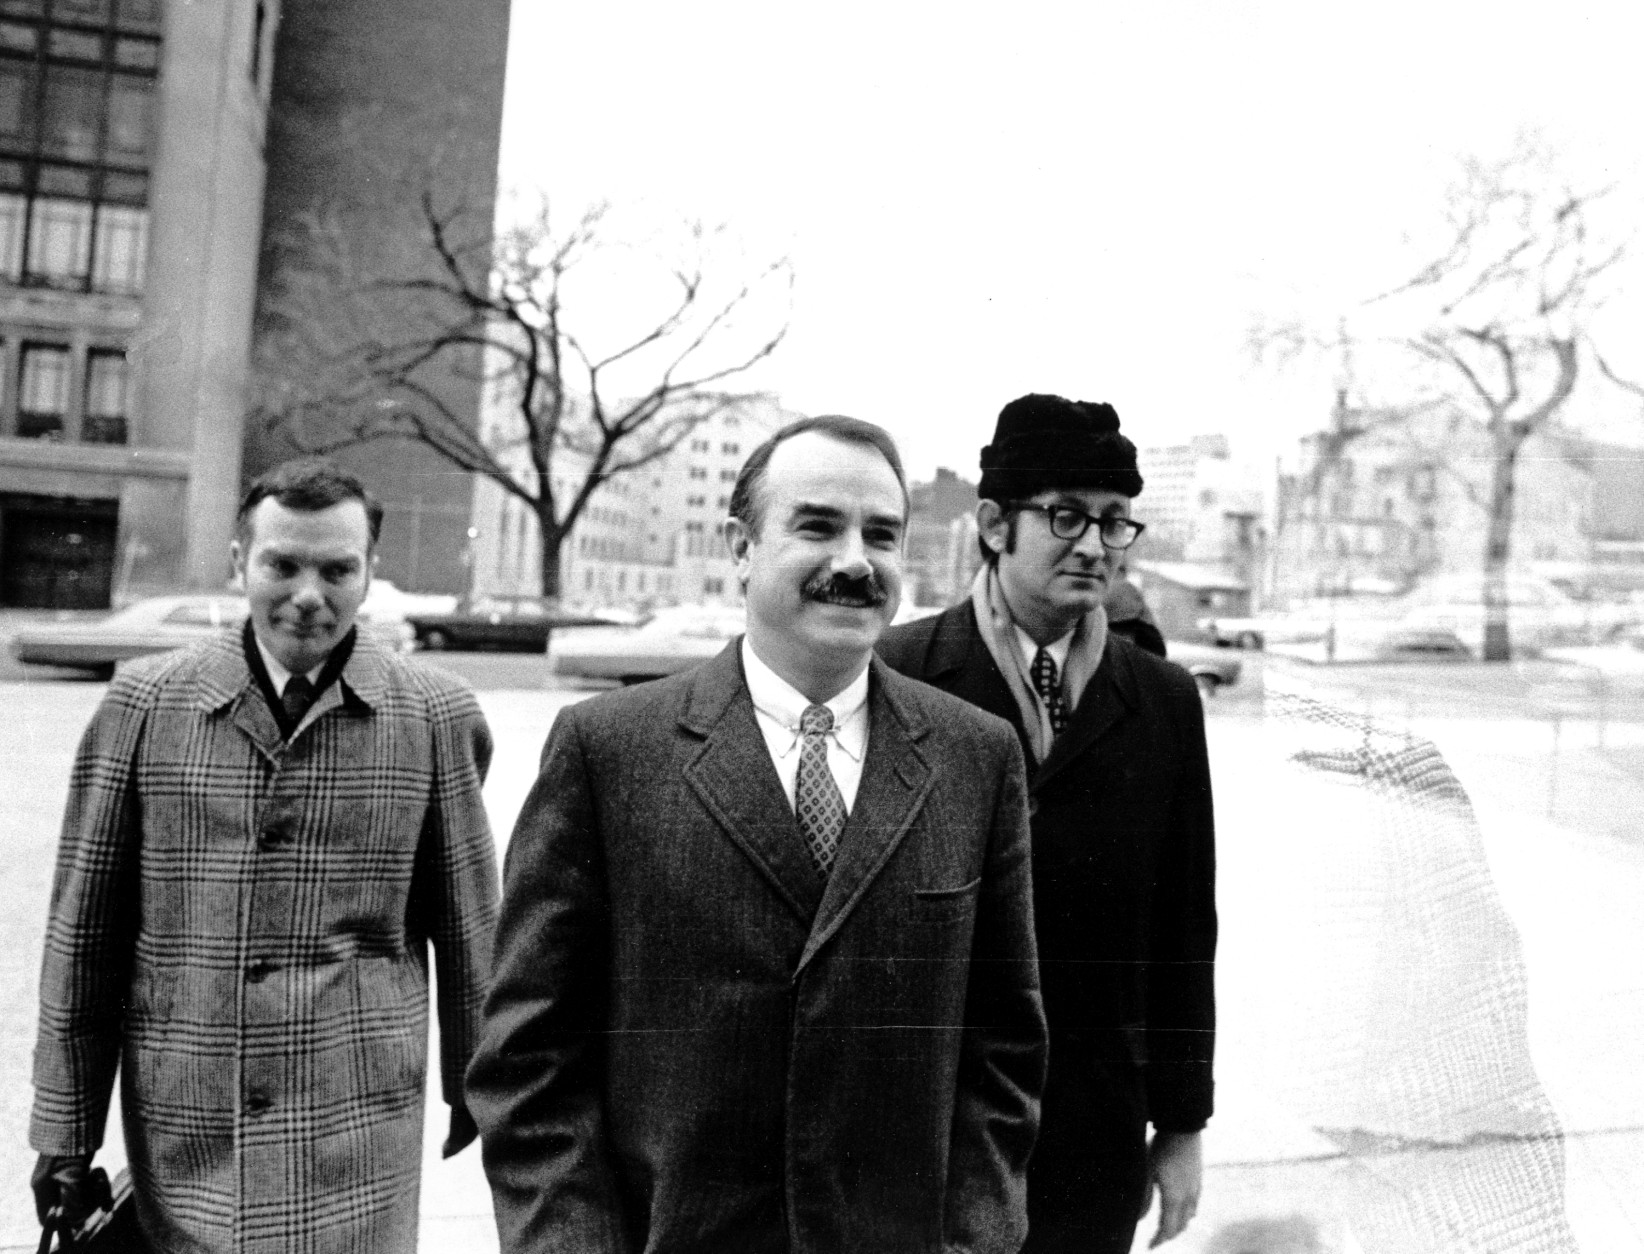 Three of the seven defendents, including G. Gordon Liddy, center, charged in connection with the break-in and alleged bugging of Democratic headquarters arrive at U.S. District Court for the start of their trial on Jan. 8, 1973. Others are unidentified. (AP Photo)